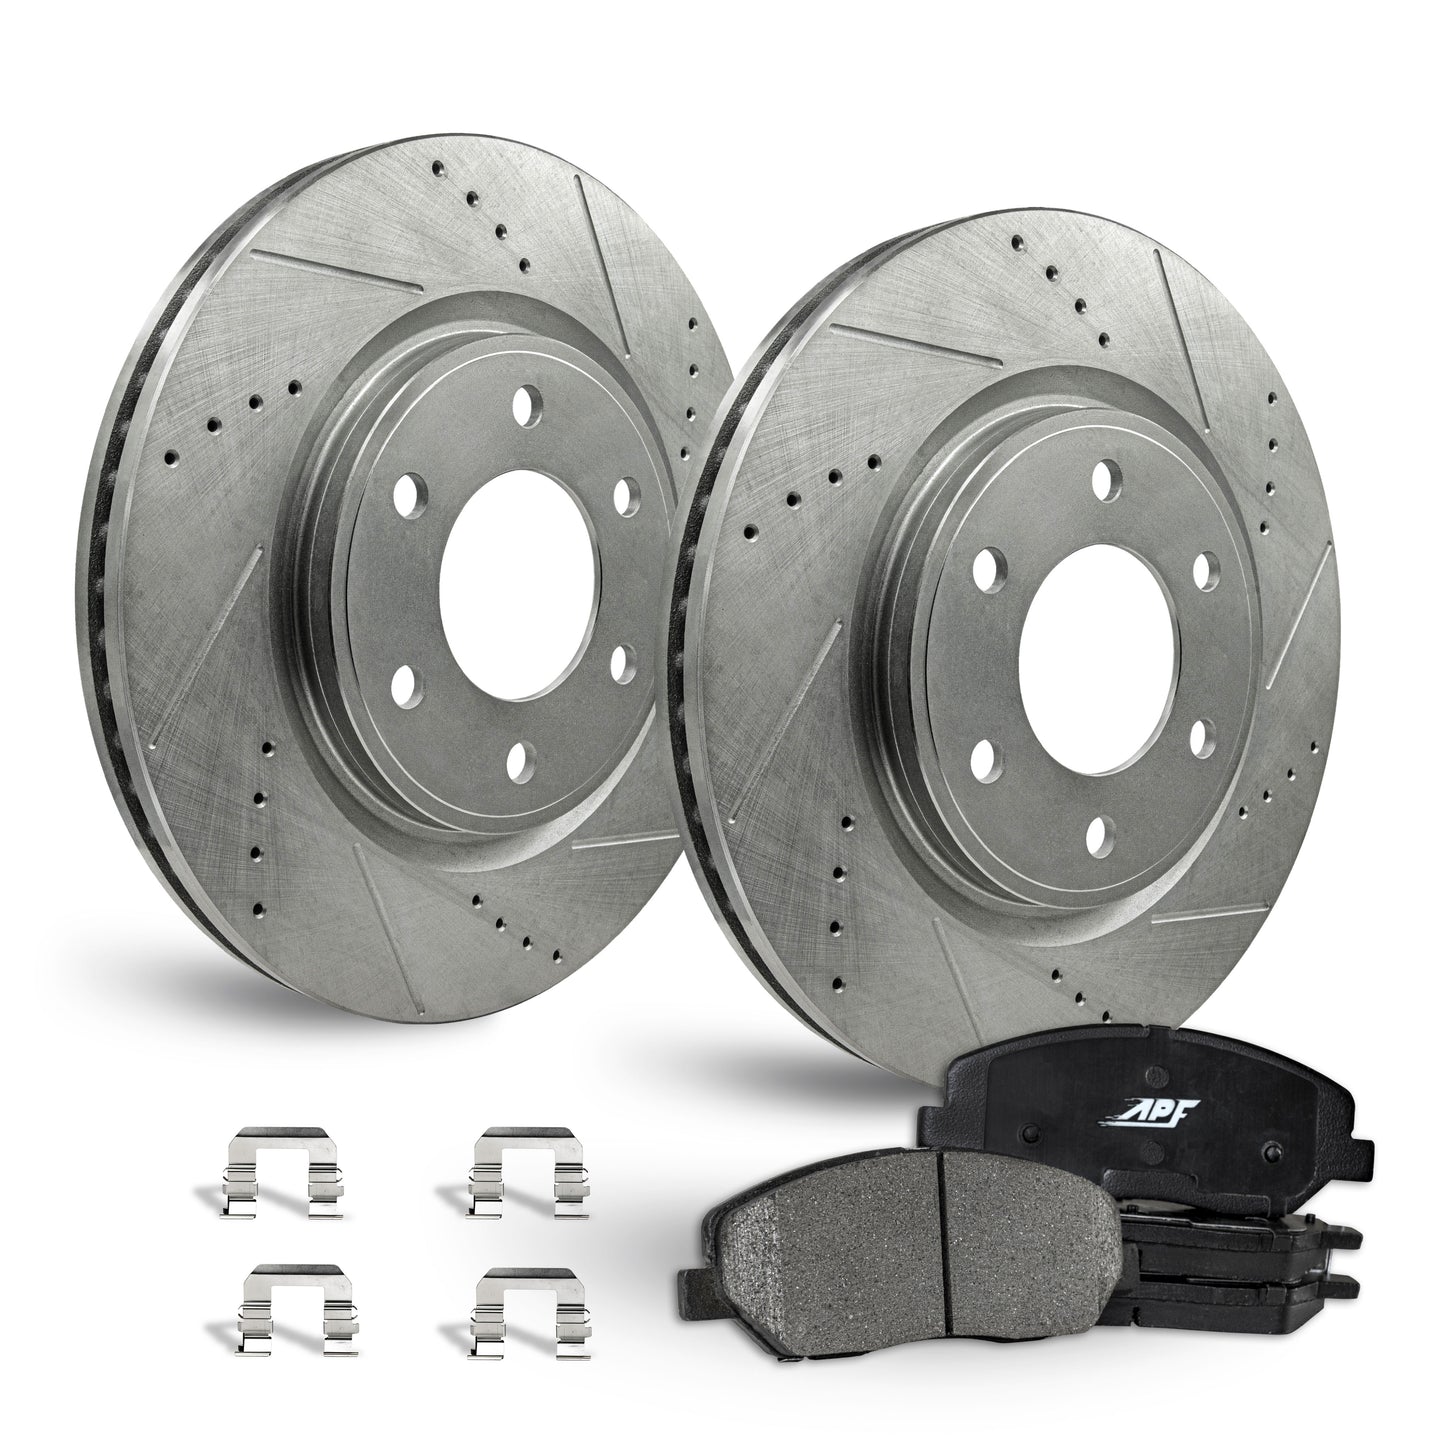 APF Rear Brake Kit compatible with Nissan Titan 2004-2015 | Zinc Drilled Slotted Rotors with Ceramic Carbon Fiber Brake Pads